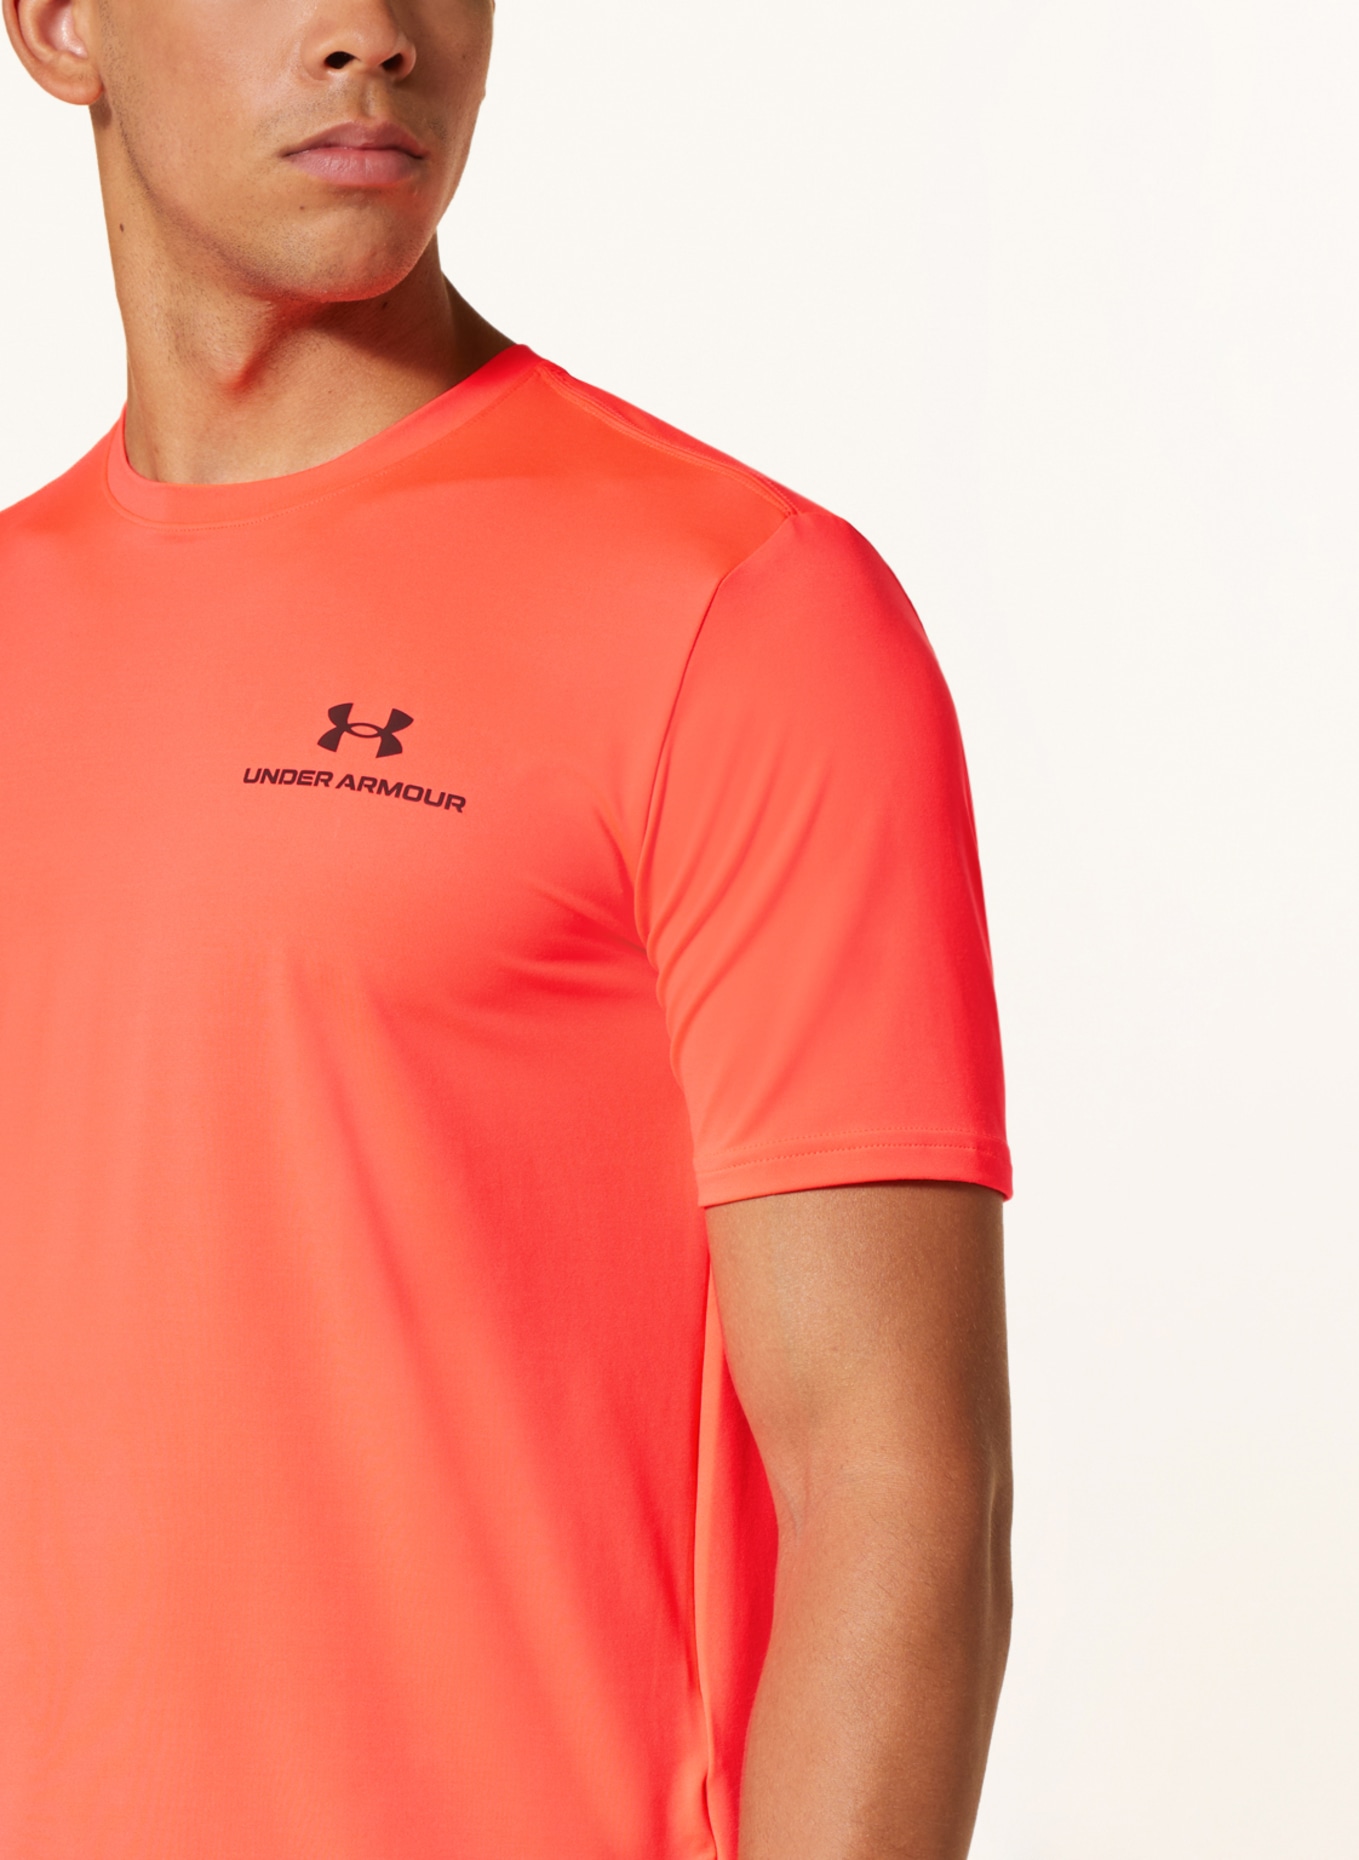 UNDER ARMOUR T-Shirt UA RUSH™ ENERGY in neon red